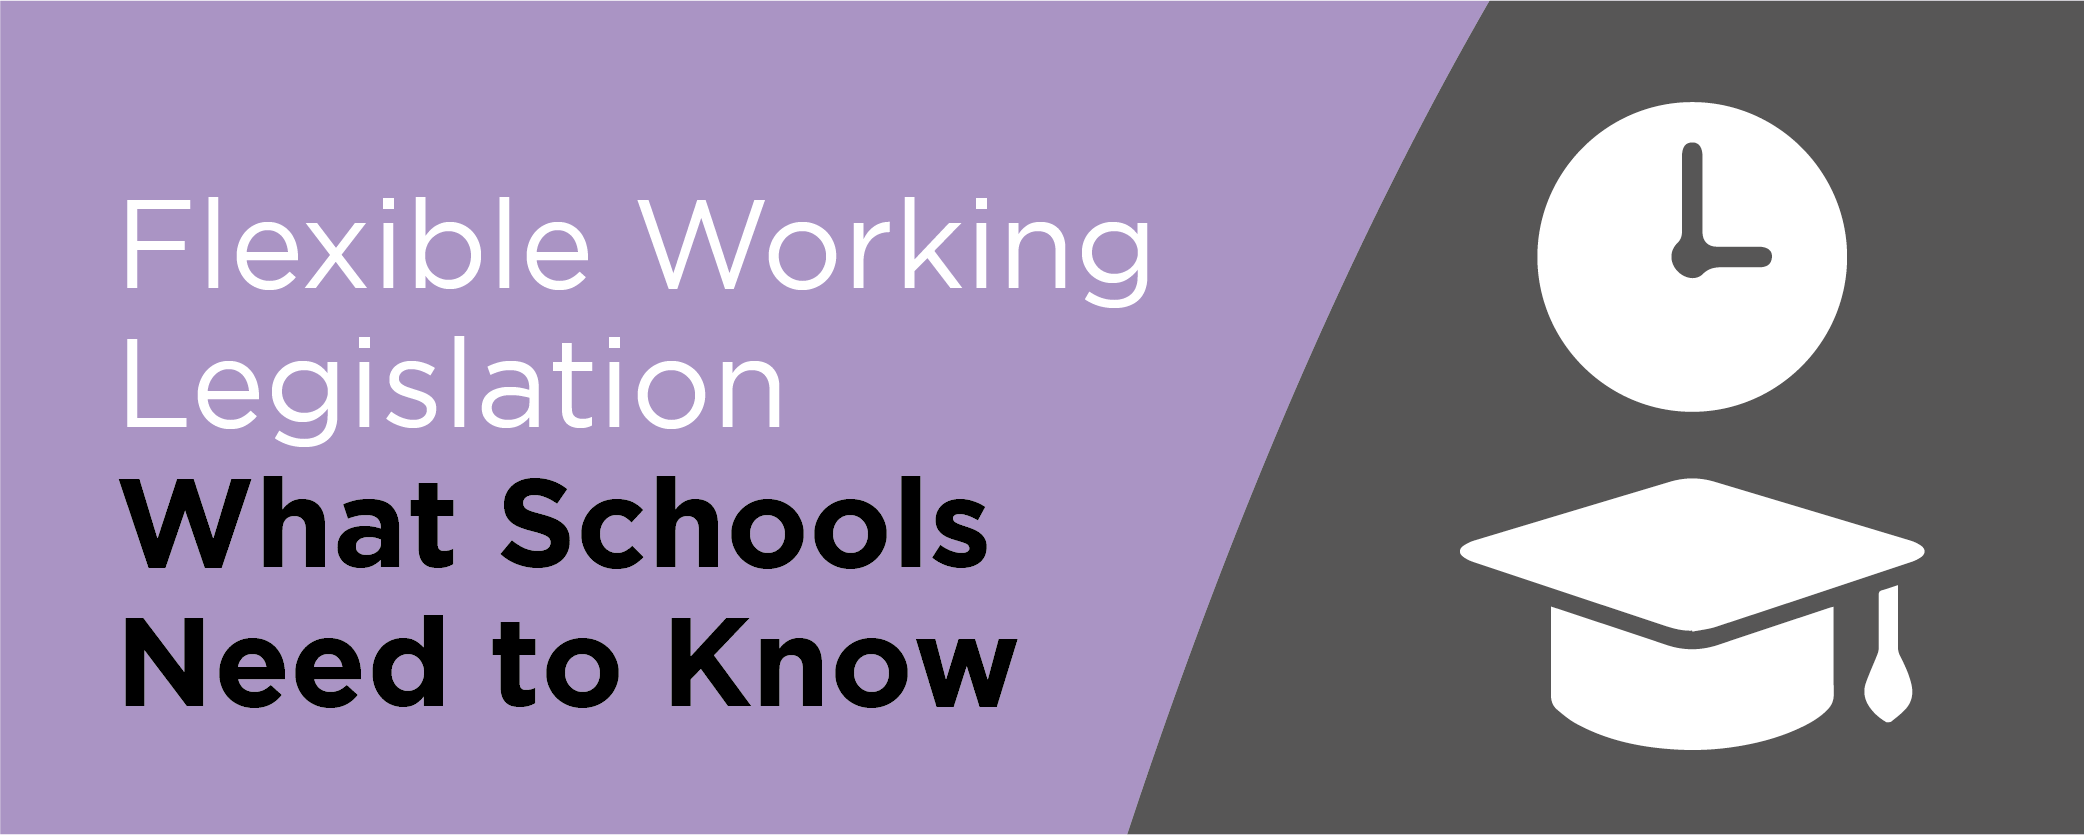 Flexible Working Legislation: What Schools Need to Know